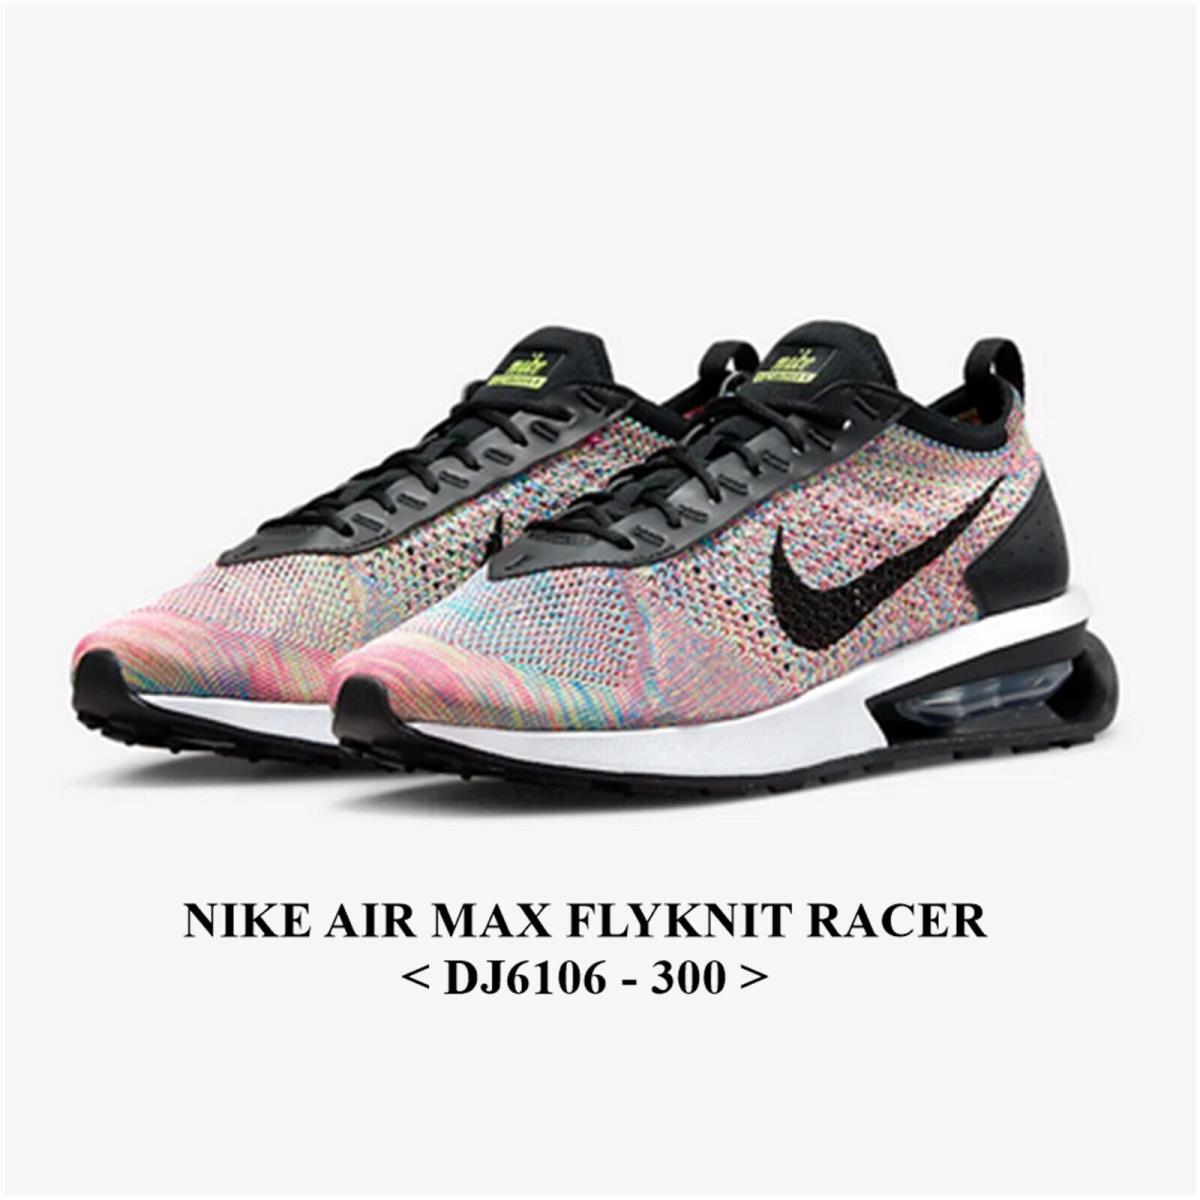 Nike Air Max Flyknit Racer CJ6106-300 .unisex Adult Athletic Shoes NO Lid - GHOST GREEN/BLACK-PINK BLAST